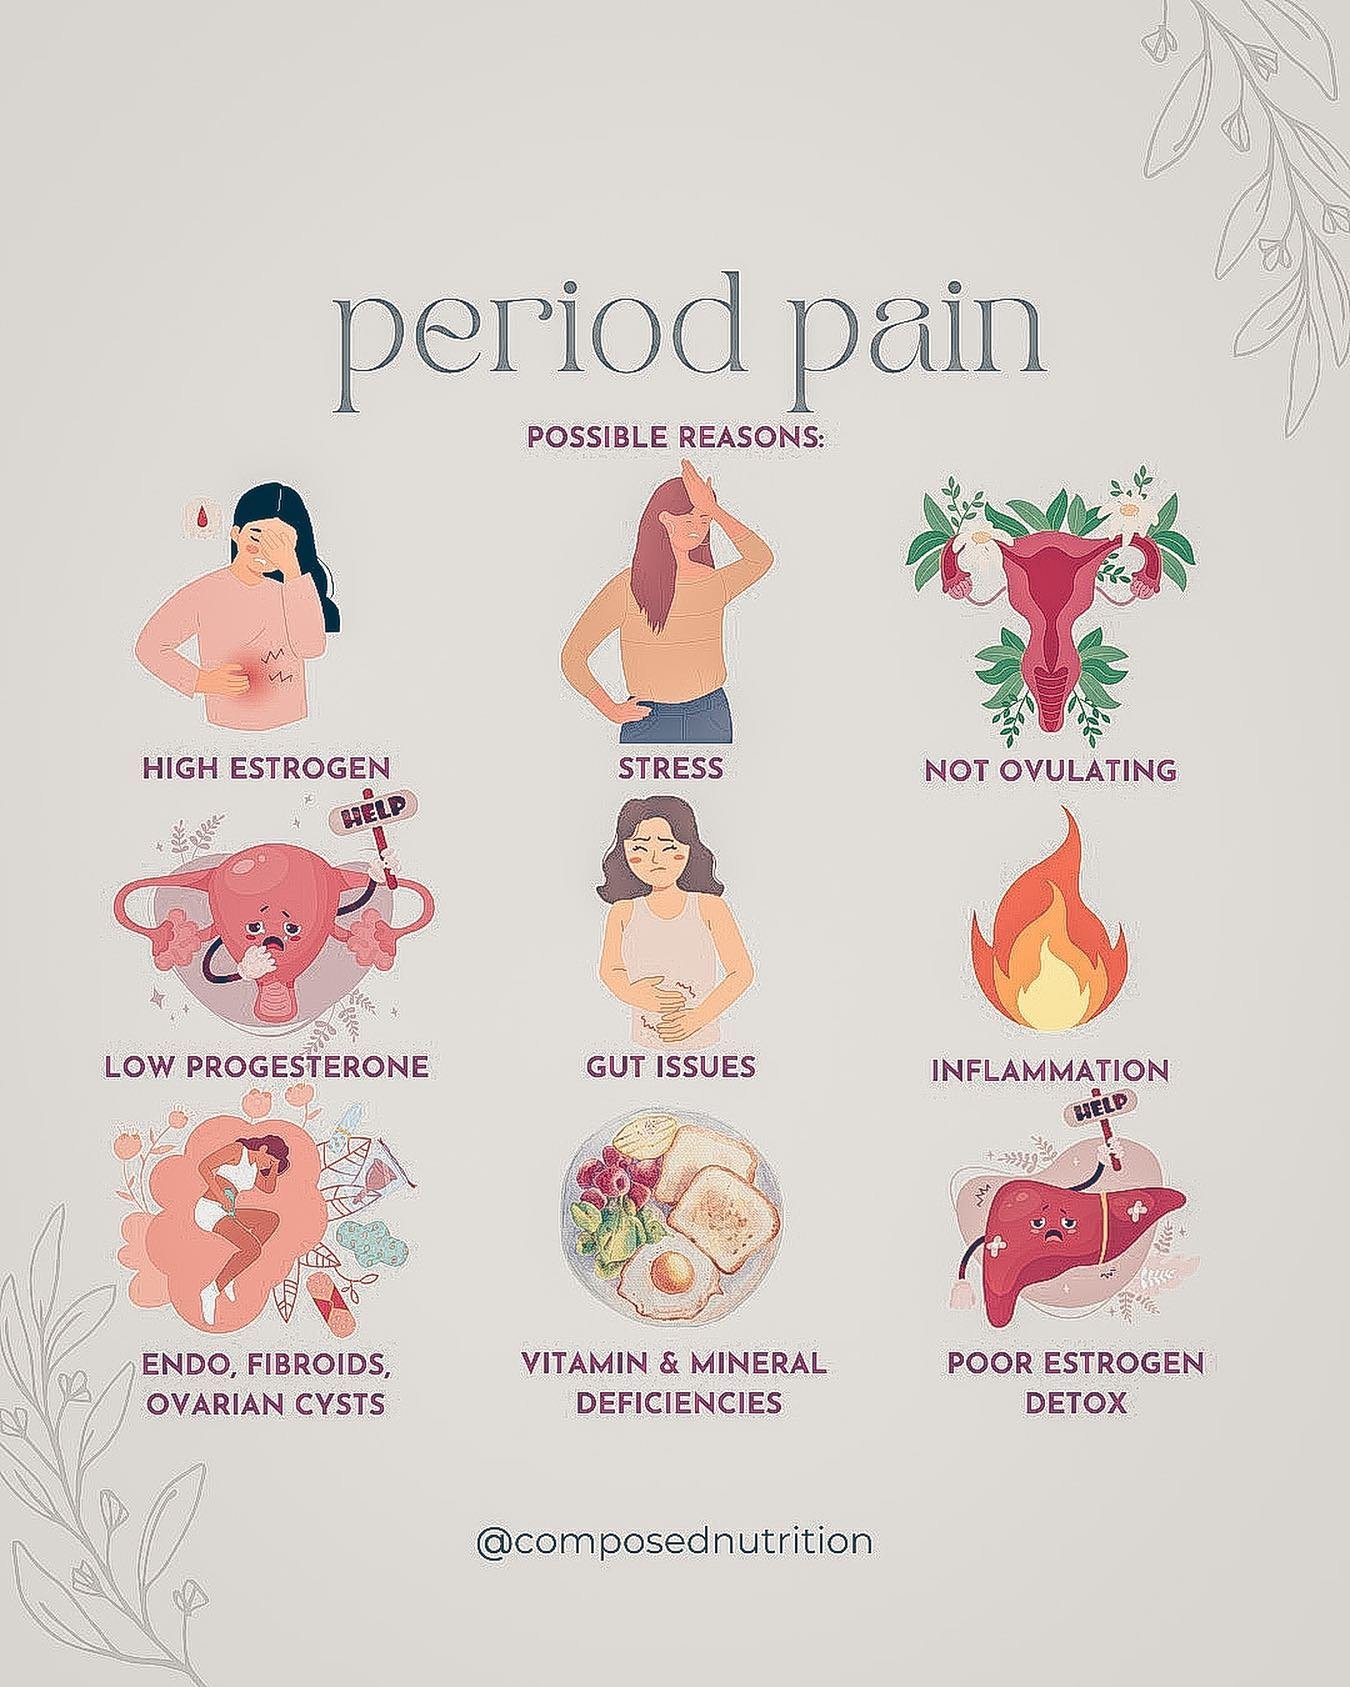 ROOT CAUSES ⚡️

Remember: period pain is COMMON, not NORMAL🩸⚡️

We have to address the root cause, not just the symptom!

The most common reasons (or root causes) I see for period pain:

1️⃣NUTRIENT DEFICIENCIES
2️⃣PROSTAGLANDINS
3️⃣ESTROGEN DOMINAN